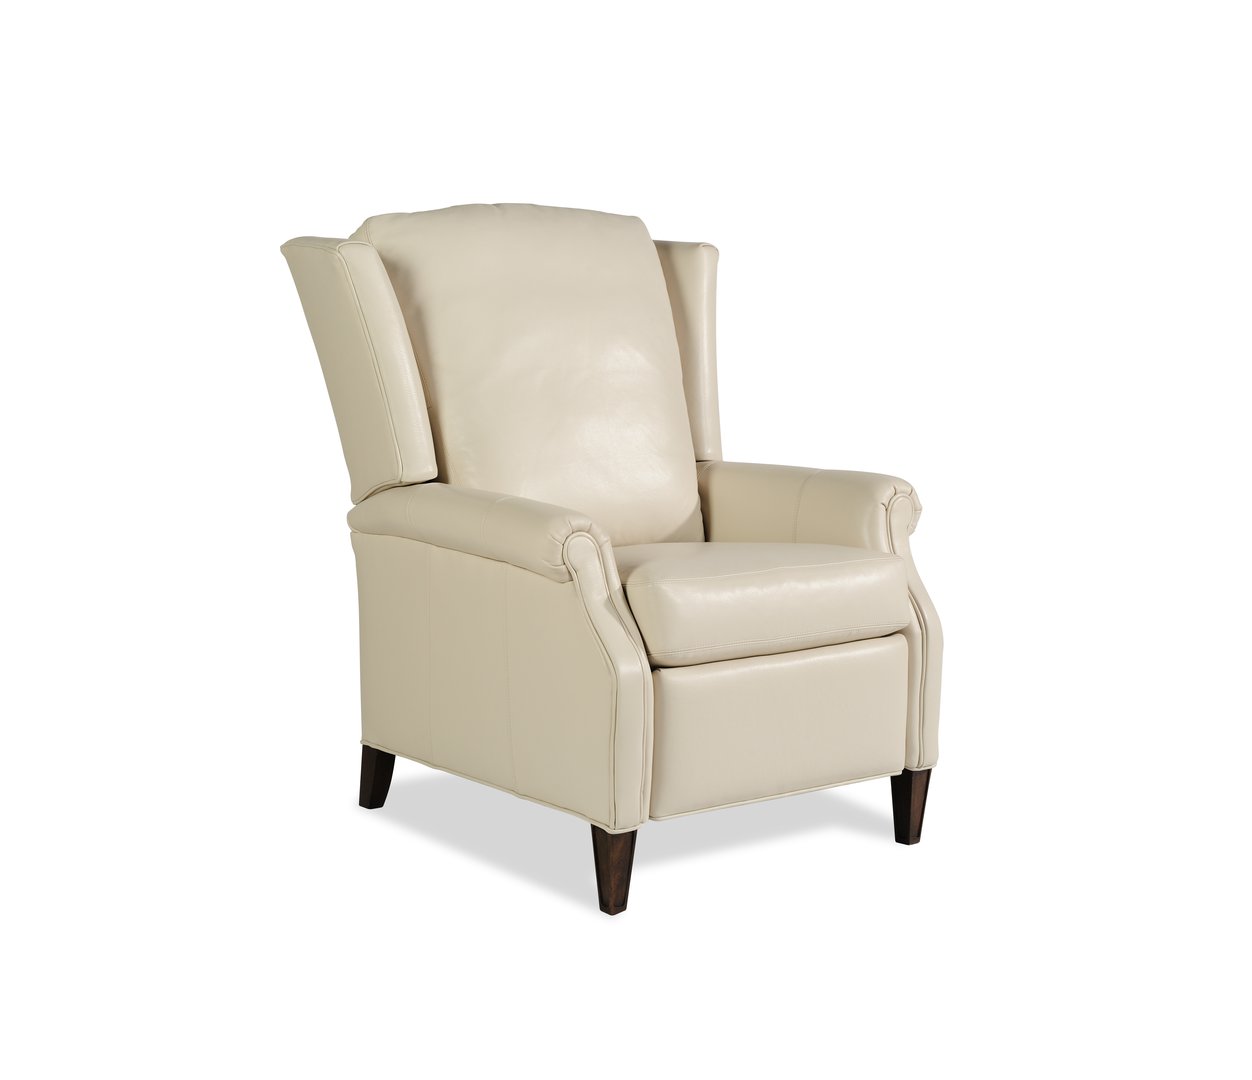 Frazier Reclining Chair Image